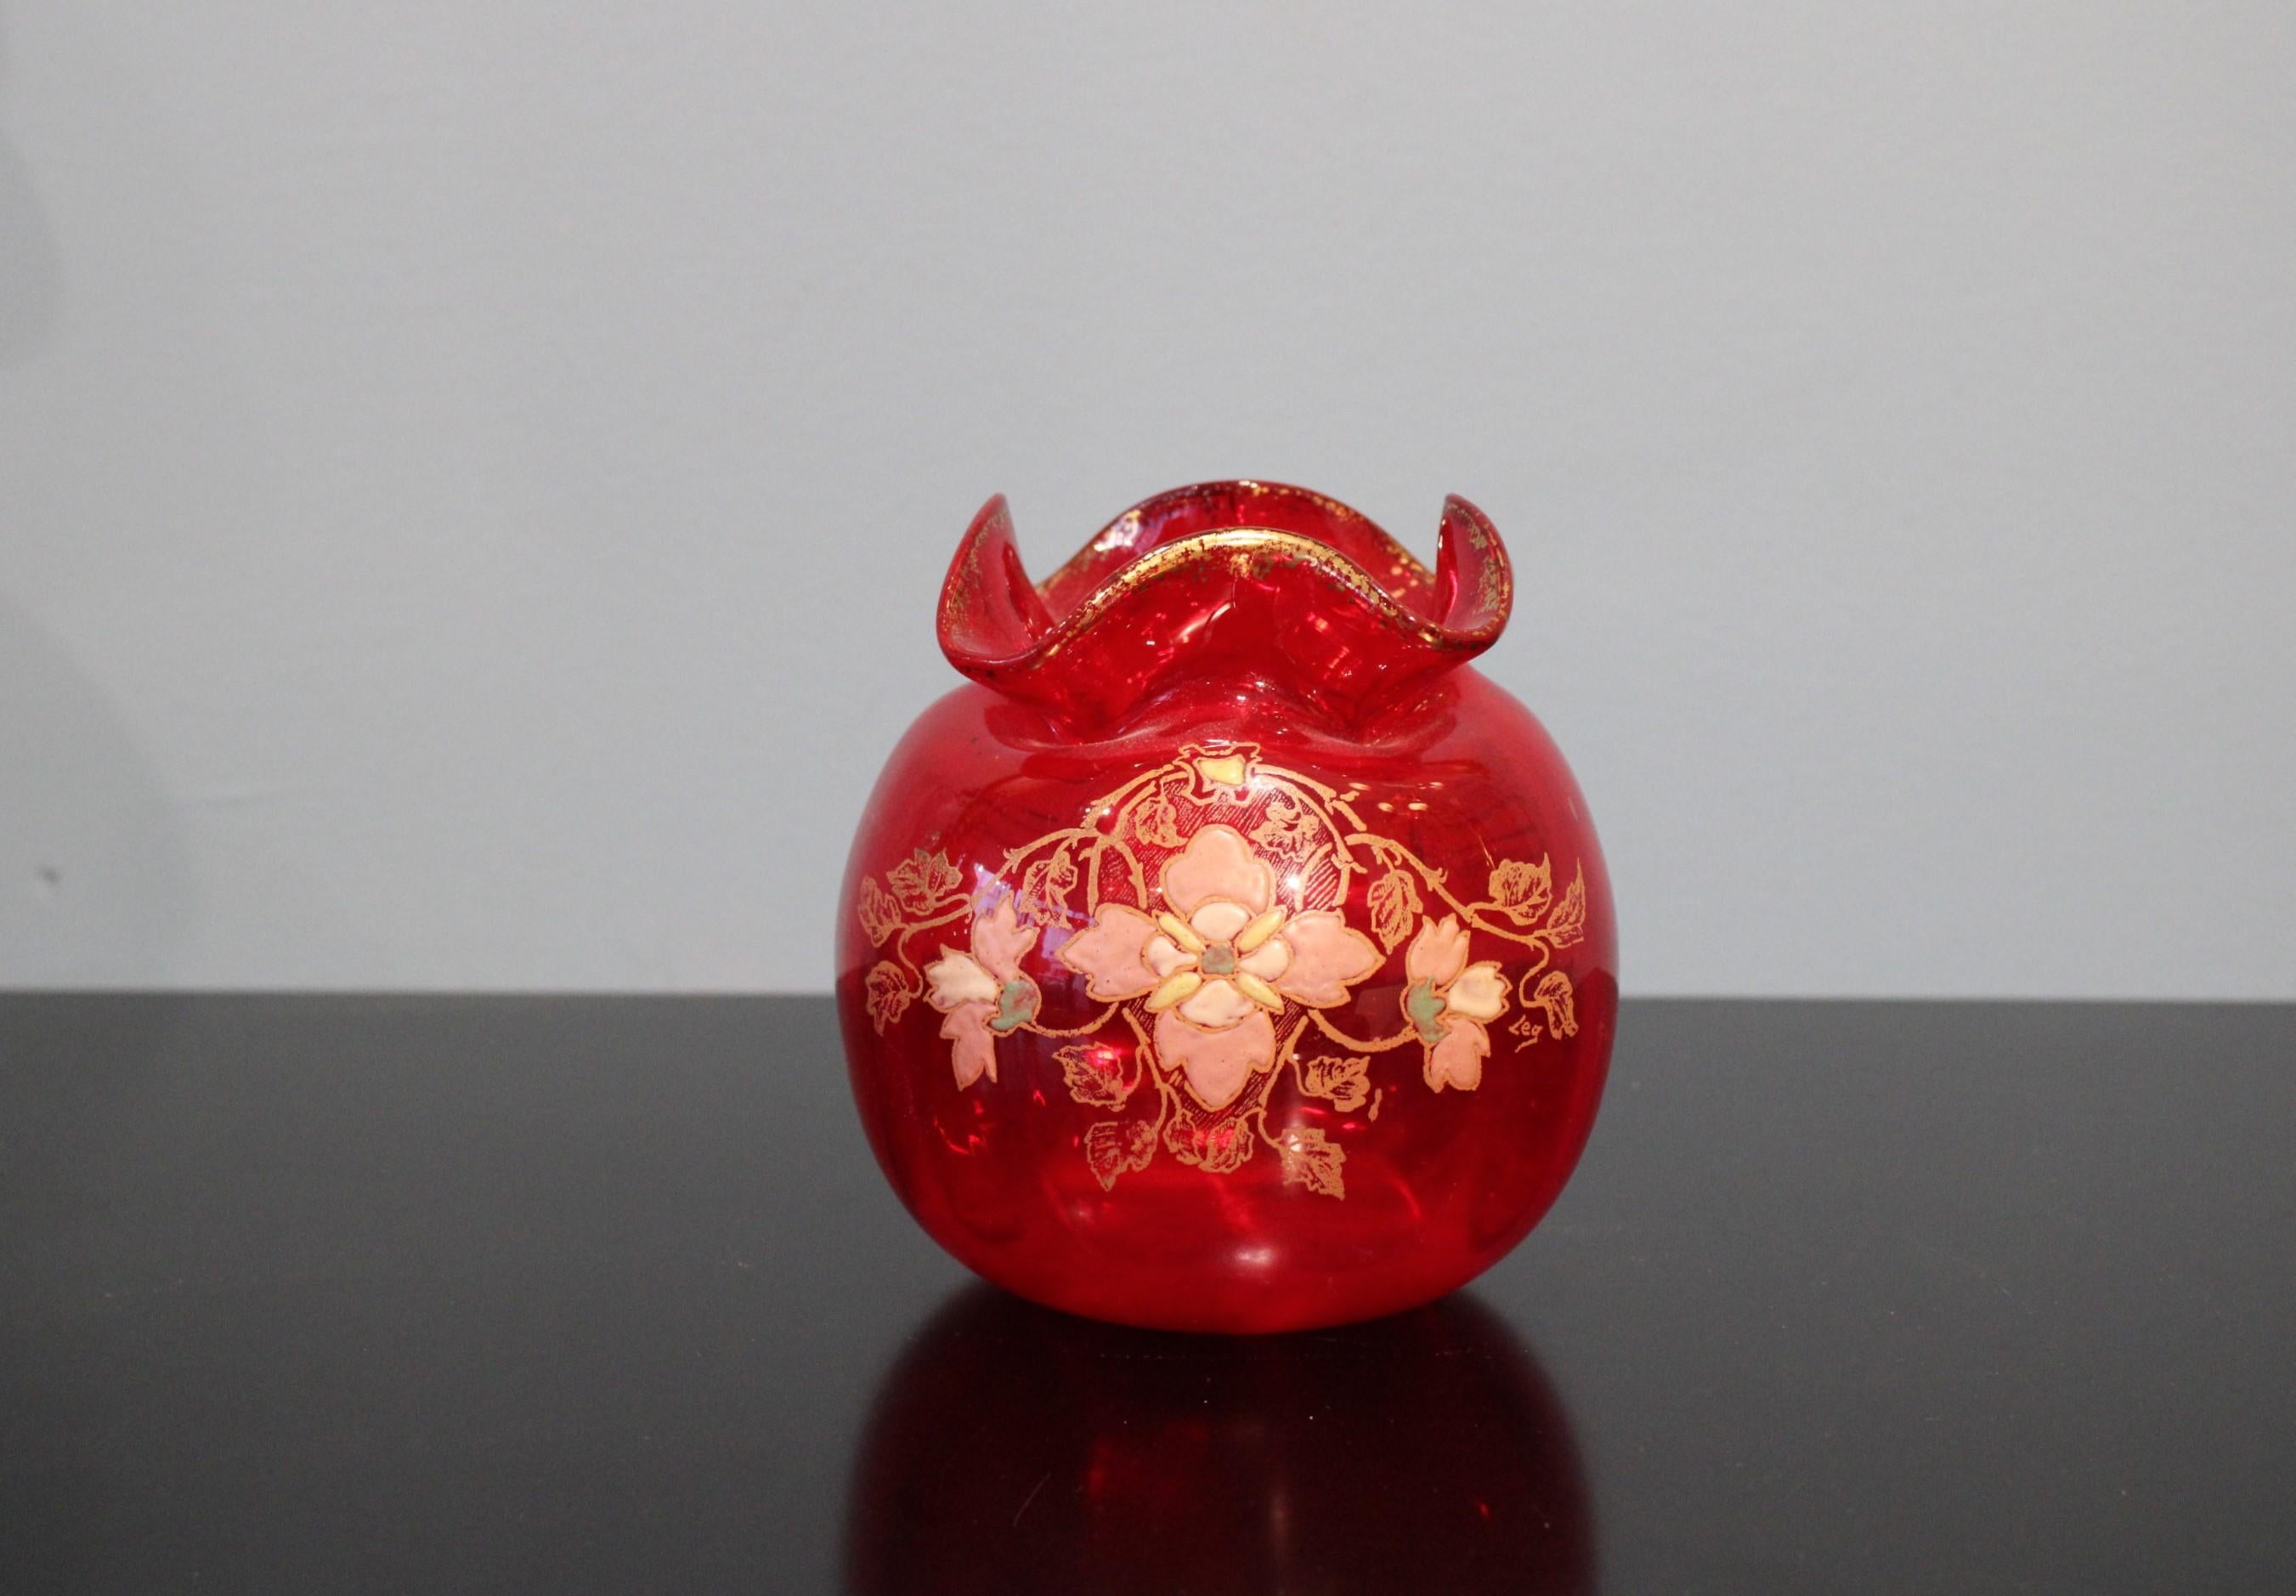 Small vase in glass. 
Art Nouveau style. Circa 1900
In red color.